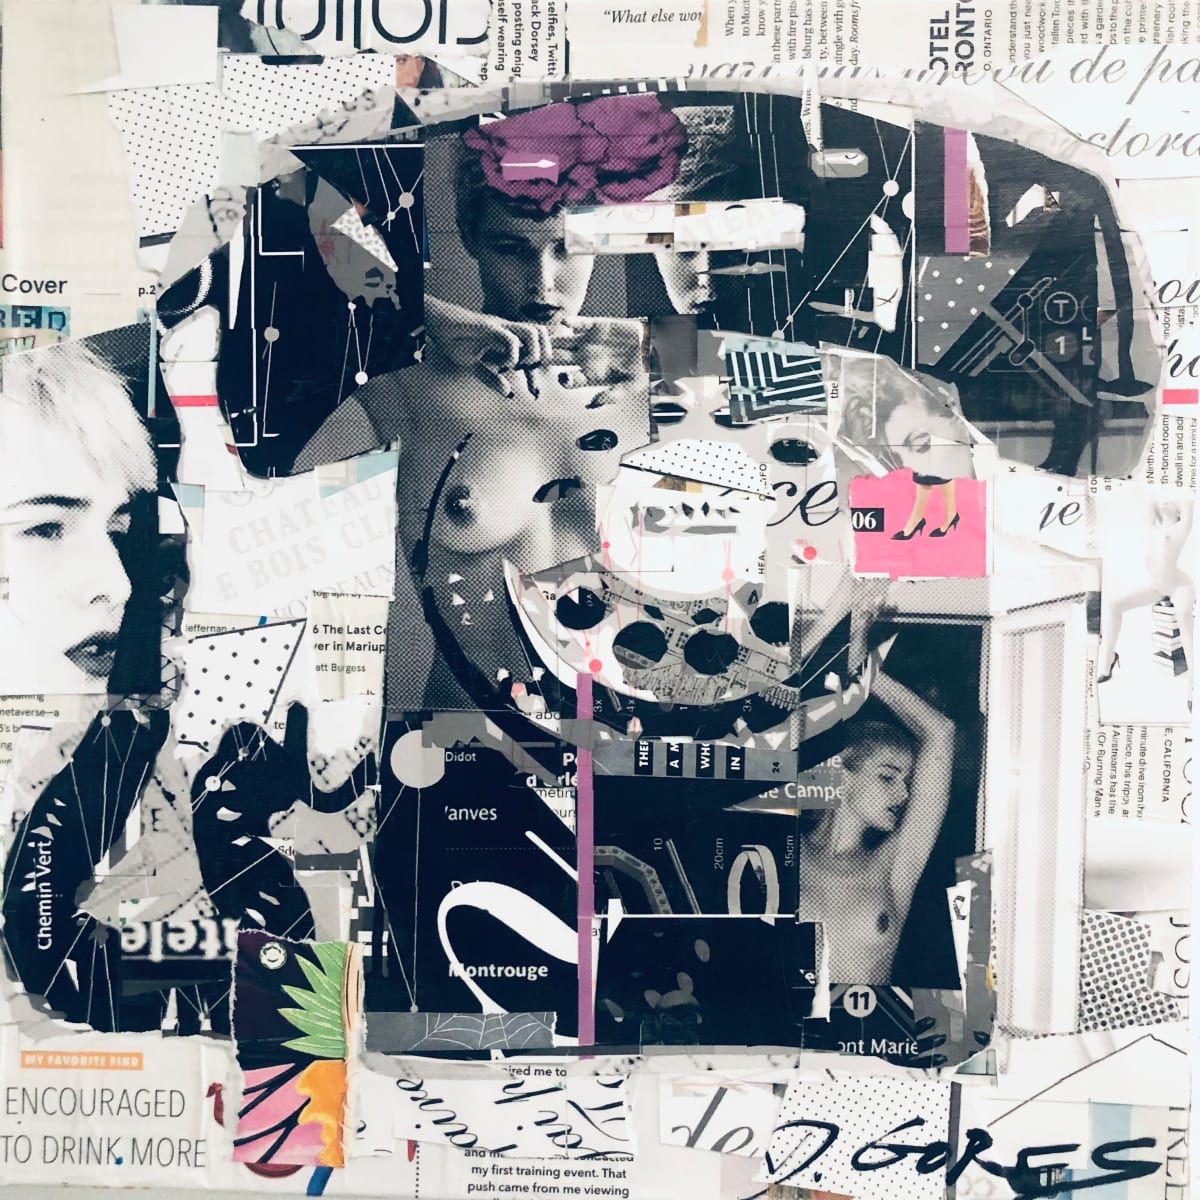 Business Meeting by Derek Gores by Derek Gores Gallery  Image: New 12”x12” original collage on canvas debuting at Aqua Art Miami. But you can purchase from afar as well~

I do love working with a recognizable vintage object and reconstructing it with radical text and patterns and images that confuse the space. Hard to top the classic rotary phone.